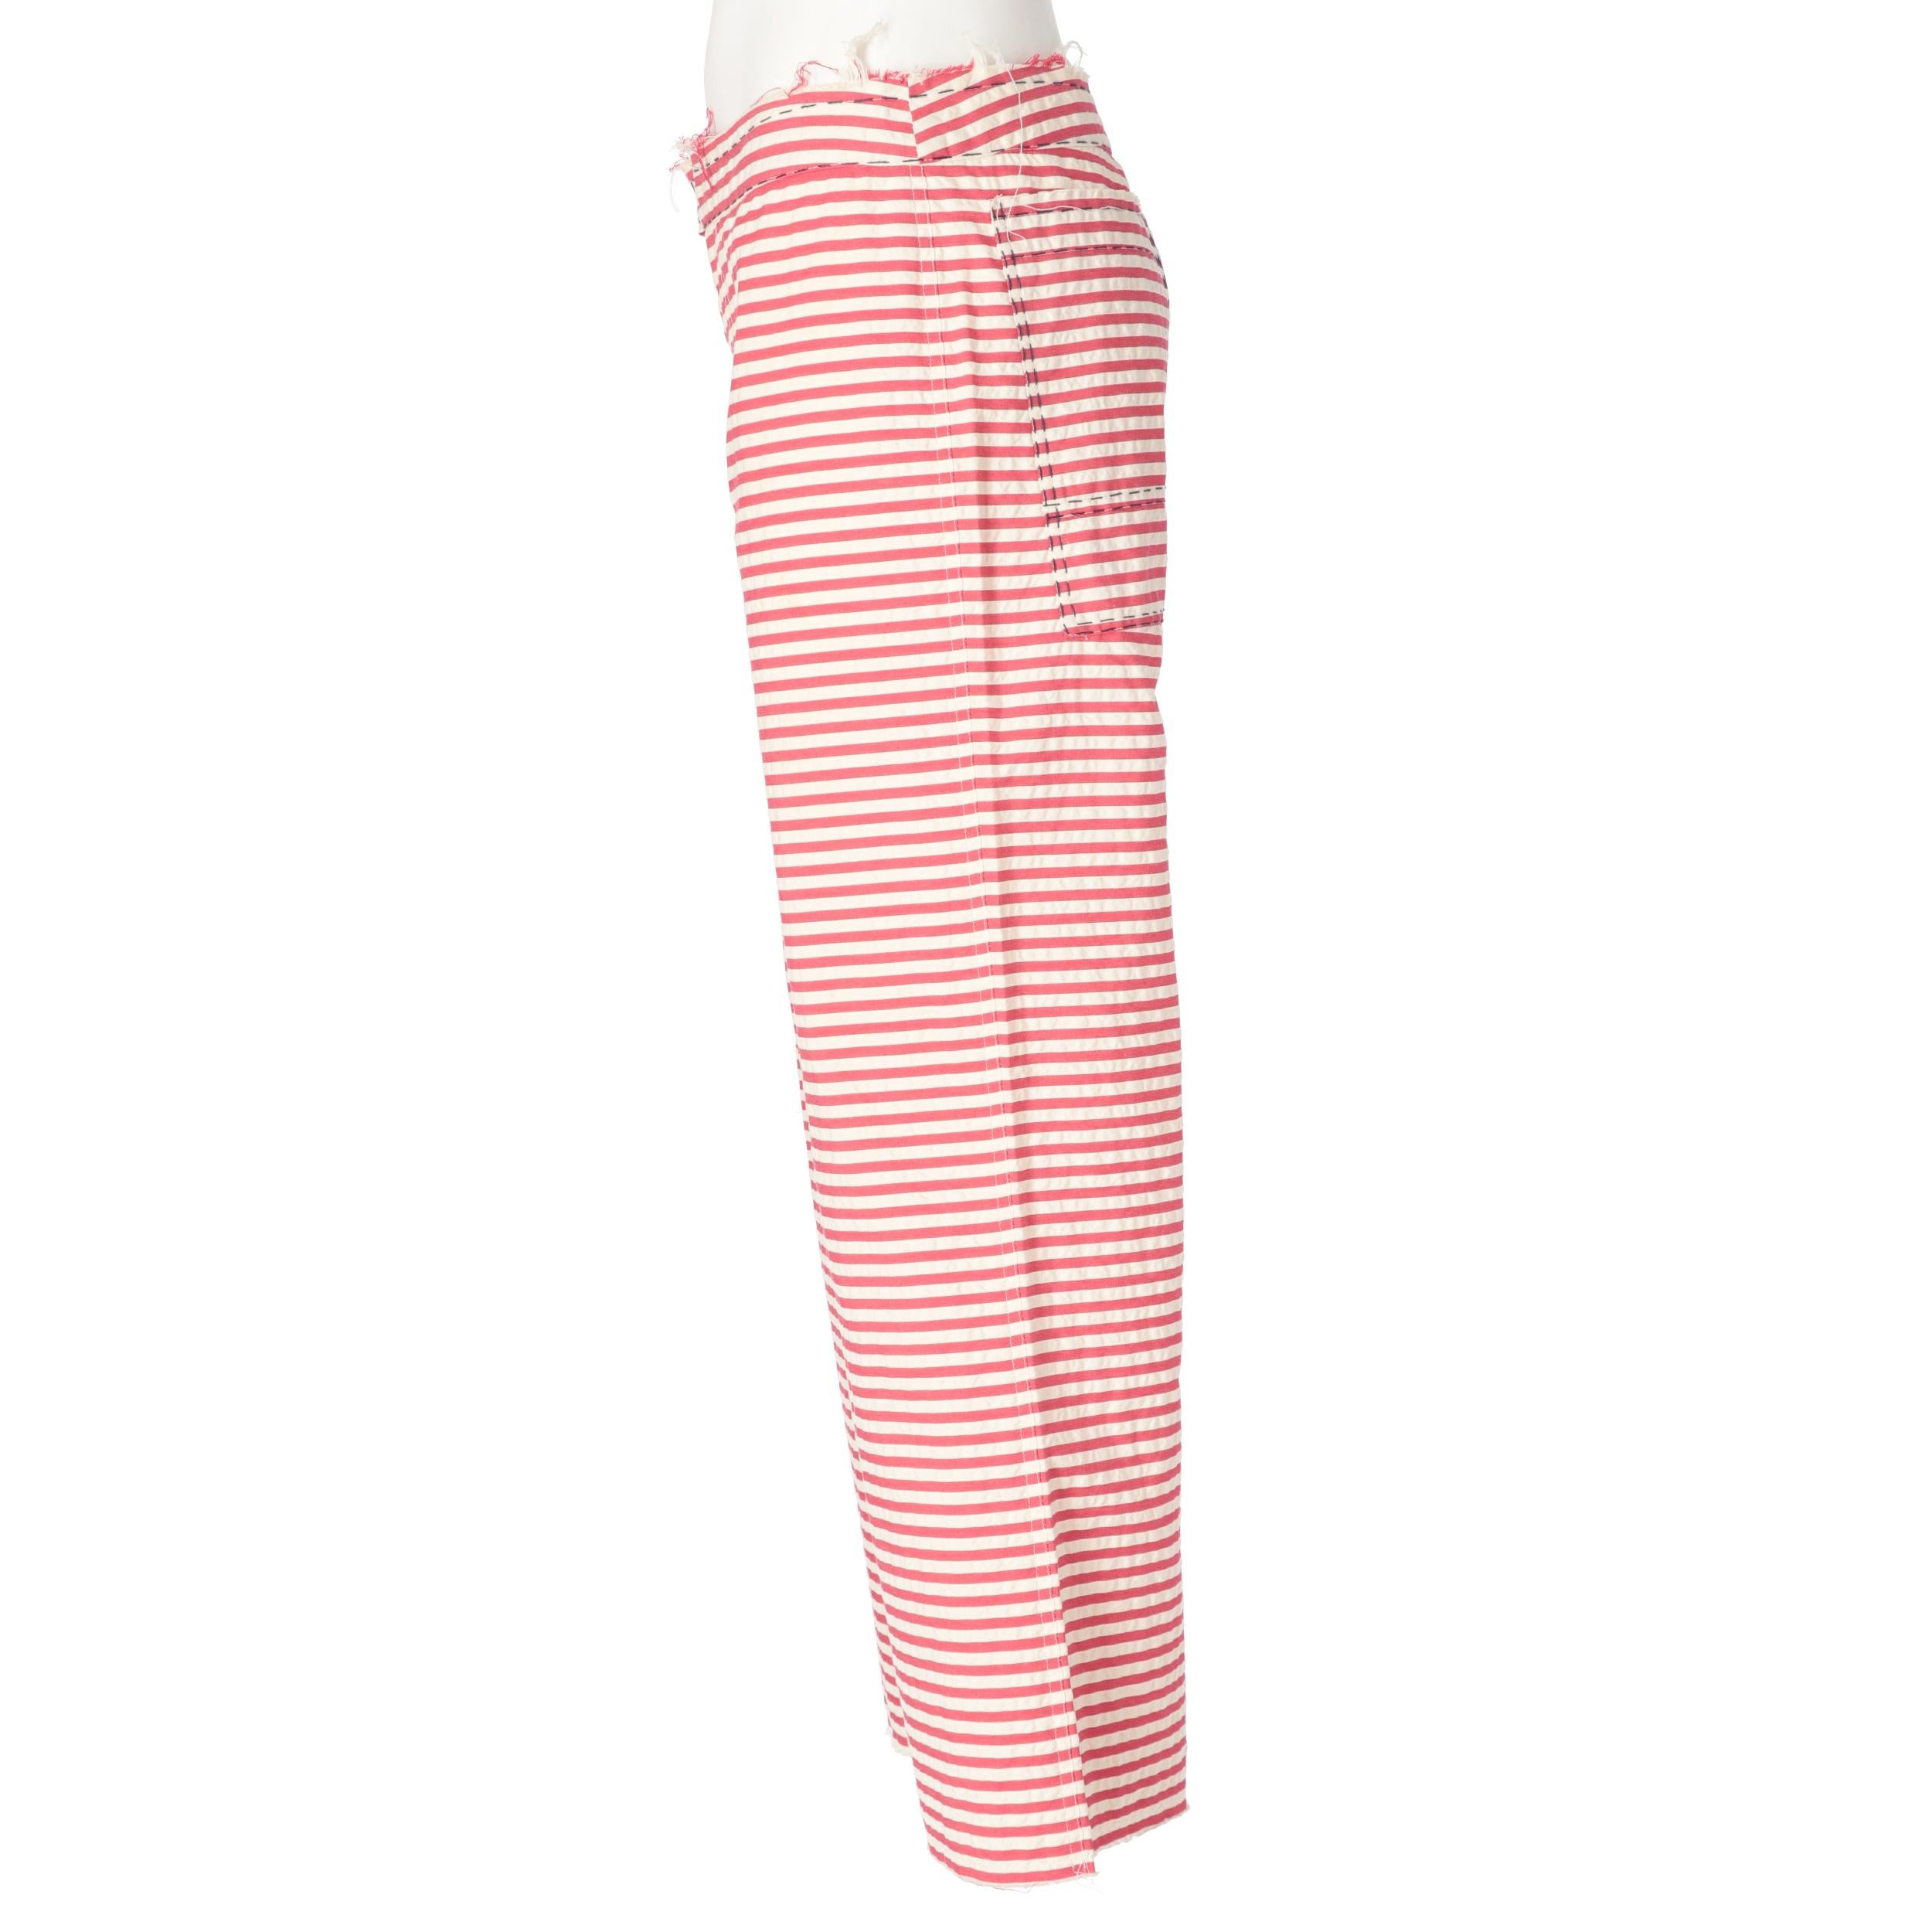 Marni trousers with white and red horizontal stripes. Model with medium waist and raw cut edges. Front closure with hook, button and zip, back patch pockets. 

Years: 2000s

Made in Italy

Size: 40 IT

Flat measurements
Height: 89 cm
Waist: 39 cm